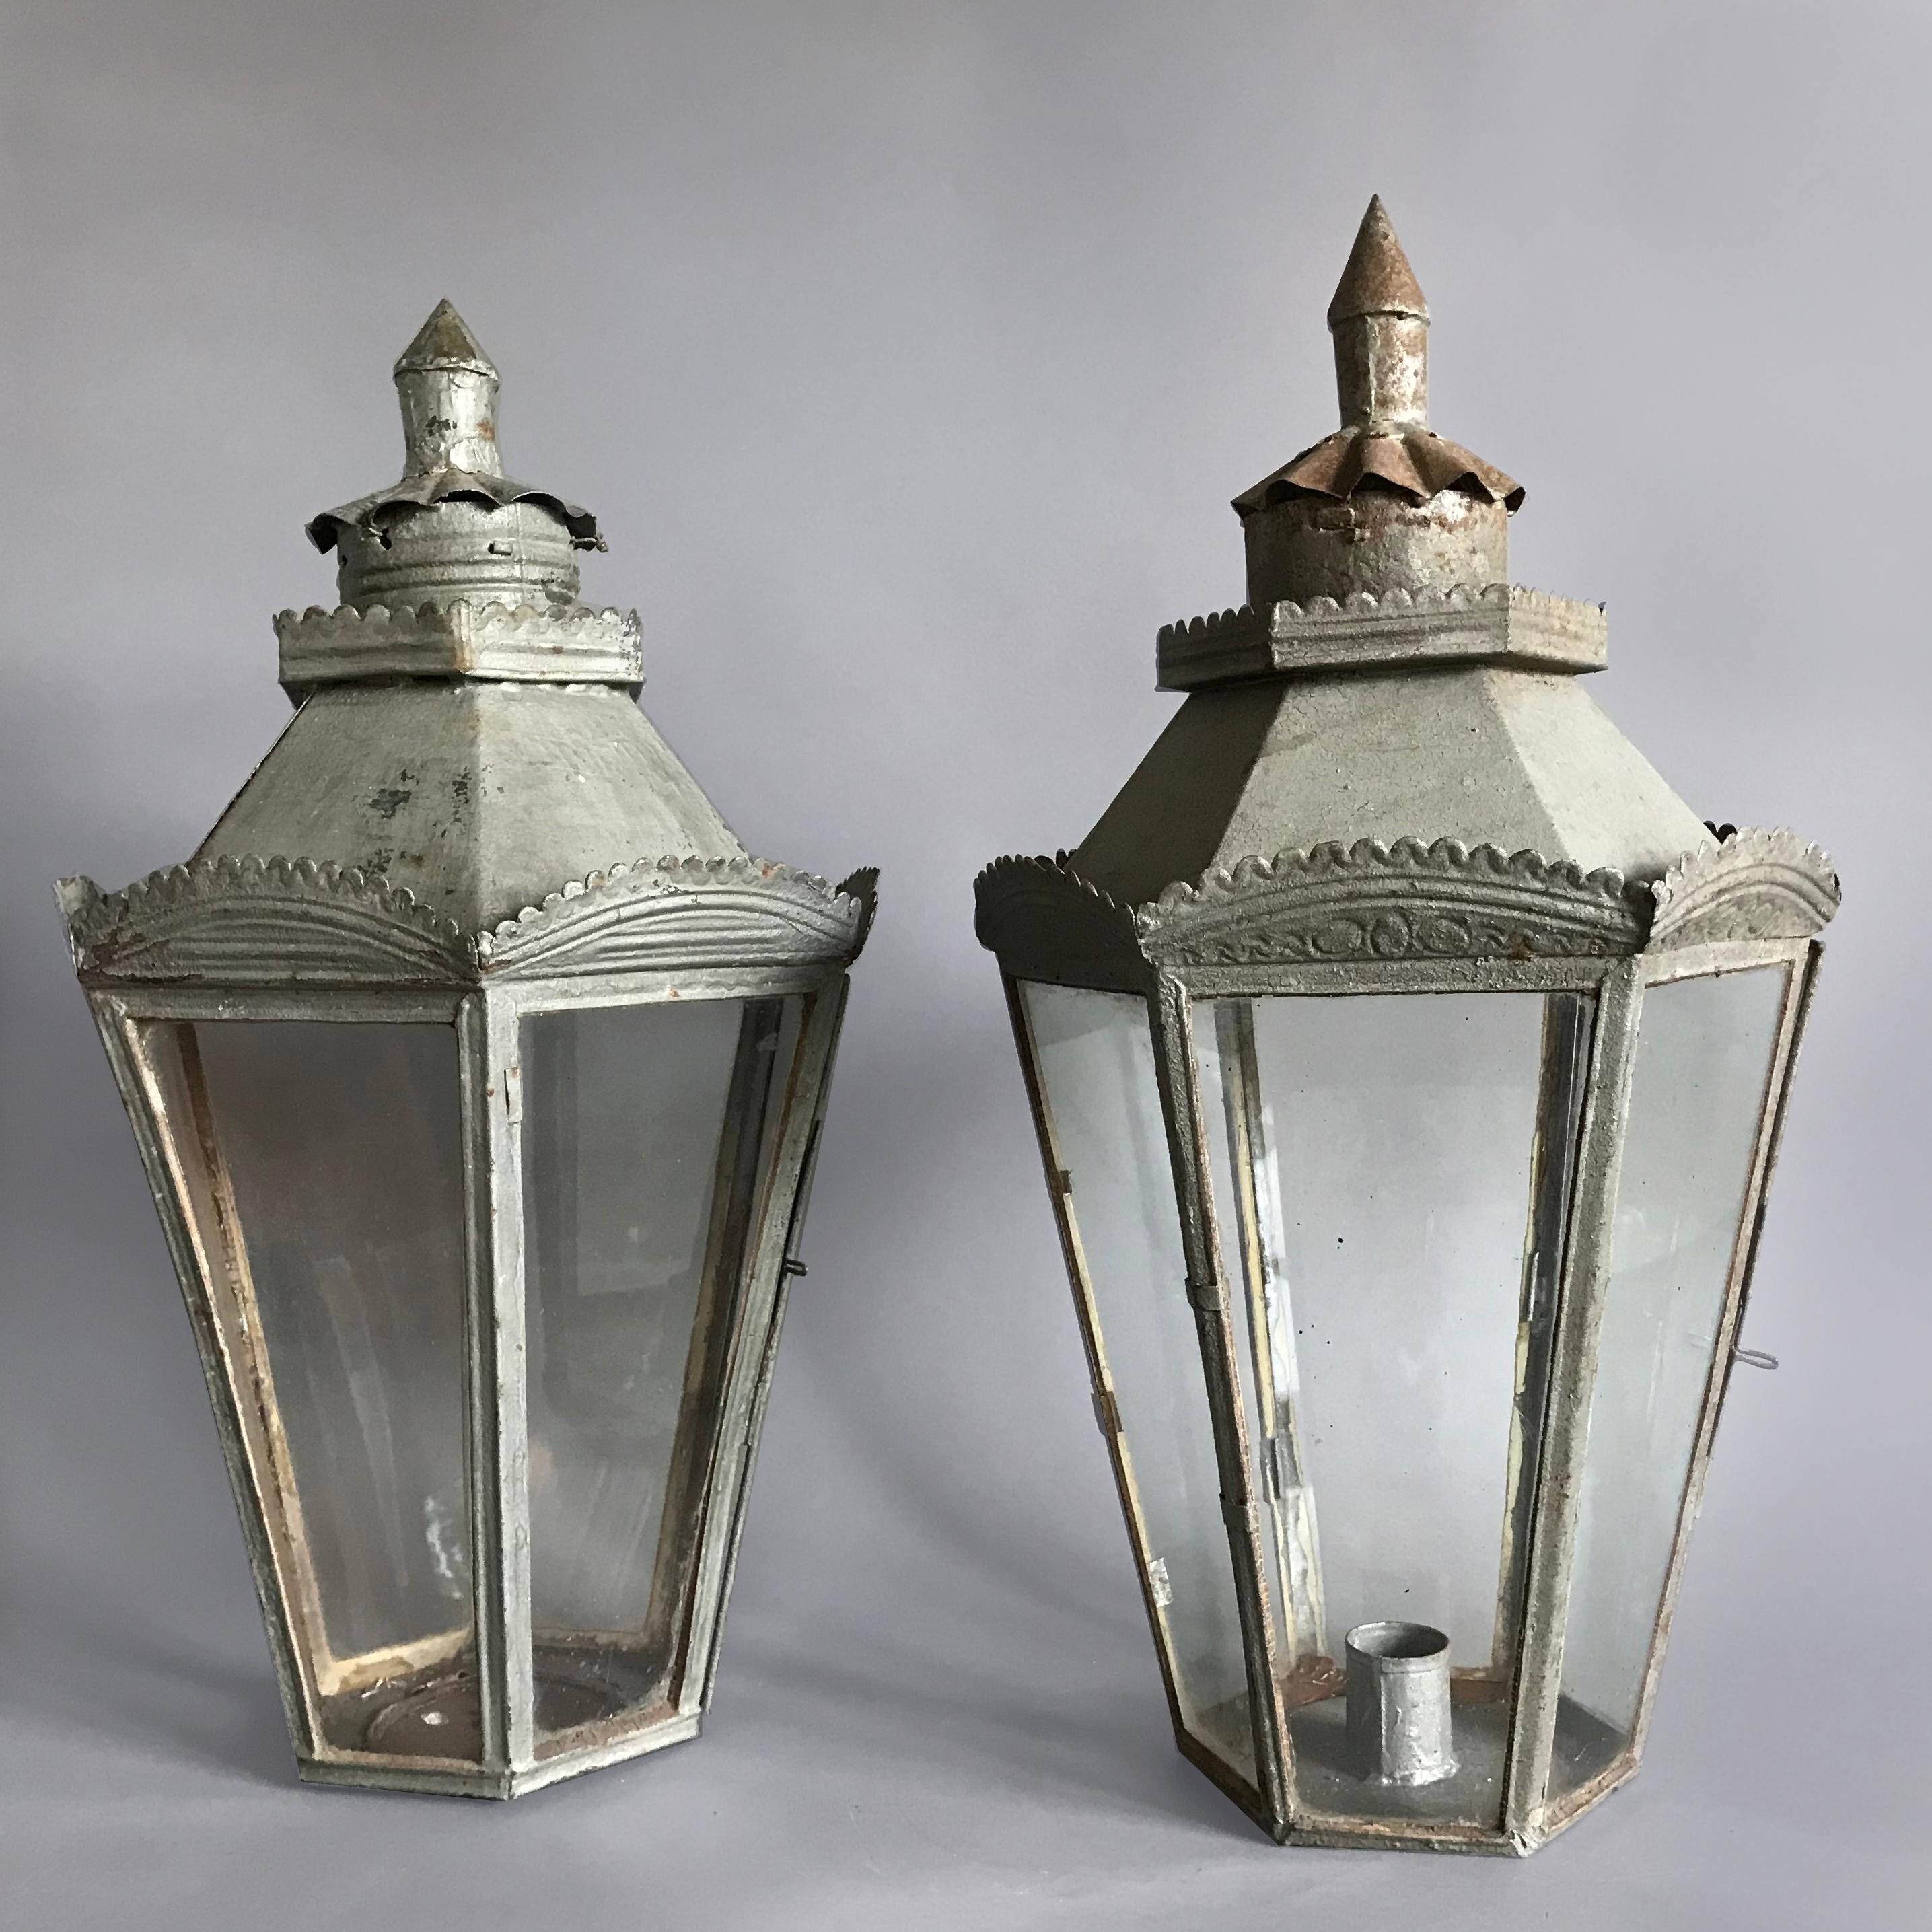 A charming pair of Italian C19th hexagonal toleware lanterns with punched and scalloped decoration.